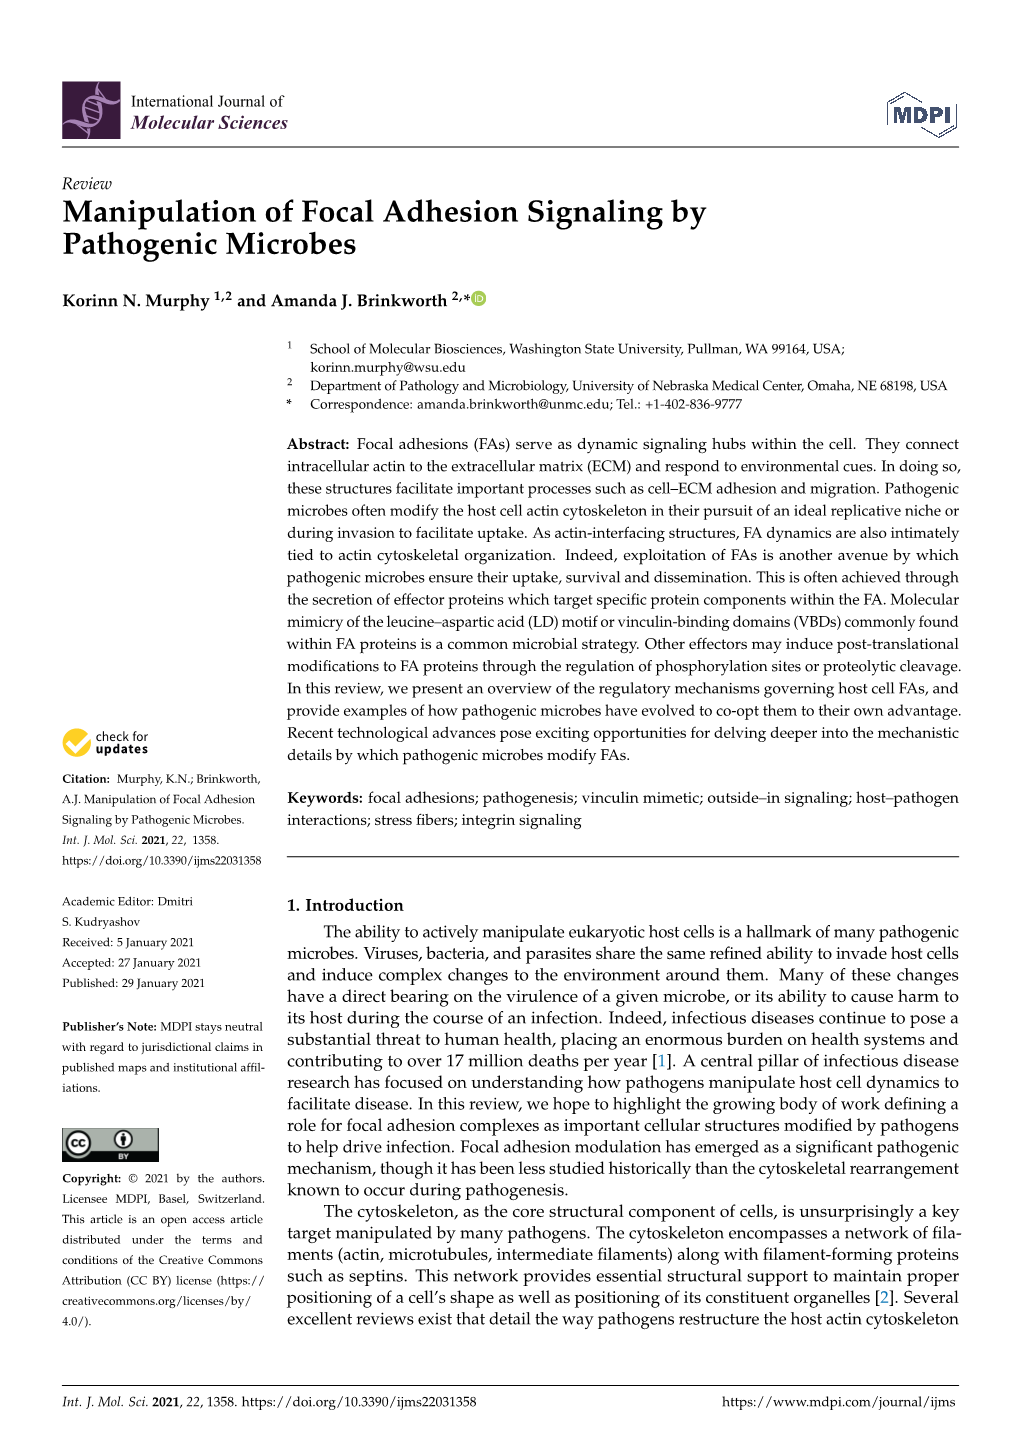 Manipulation of Focal Adhesion Signaling by Pathogenic Microbes